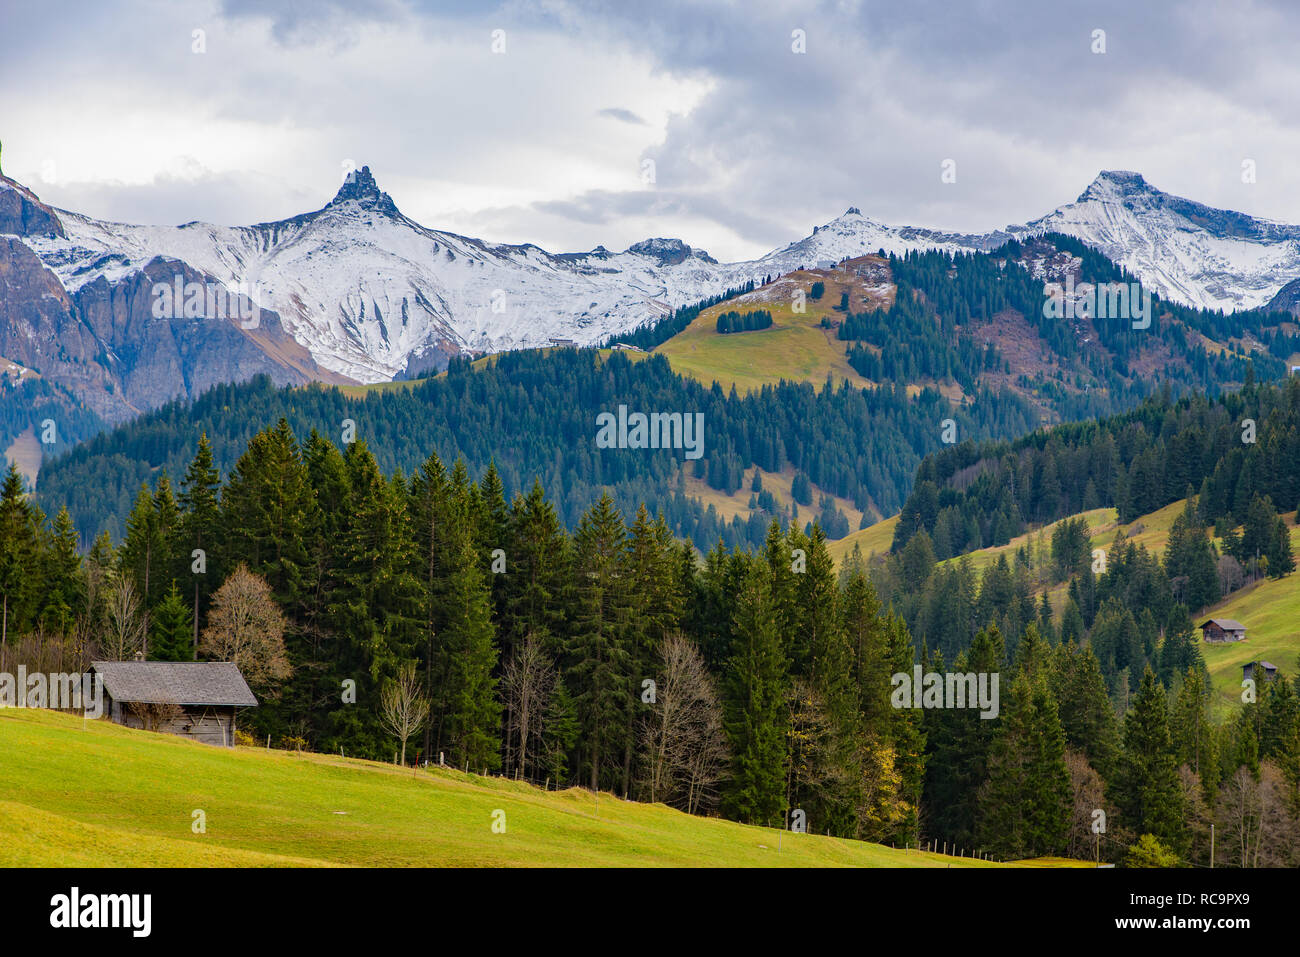 Traditional Swiss style houses on the green hills with forest in the Alps area of Switzerland, Europe Stock Photo